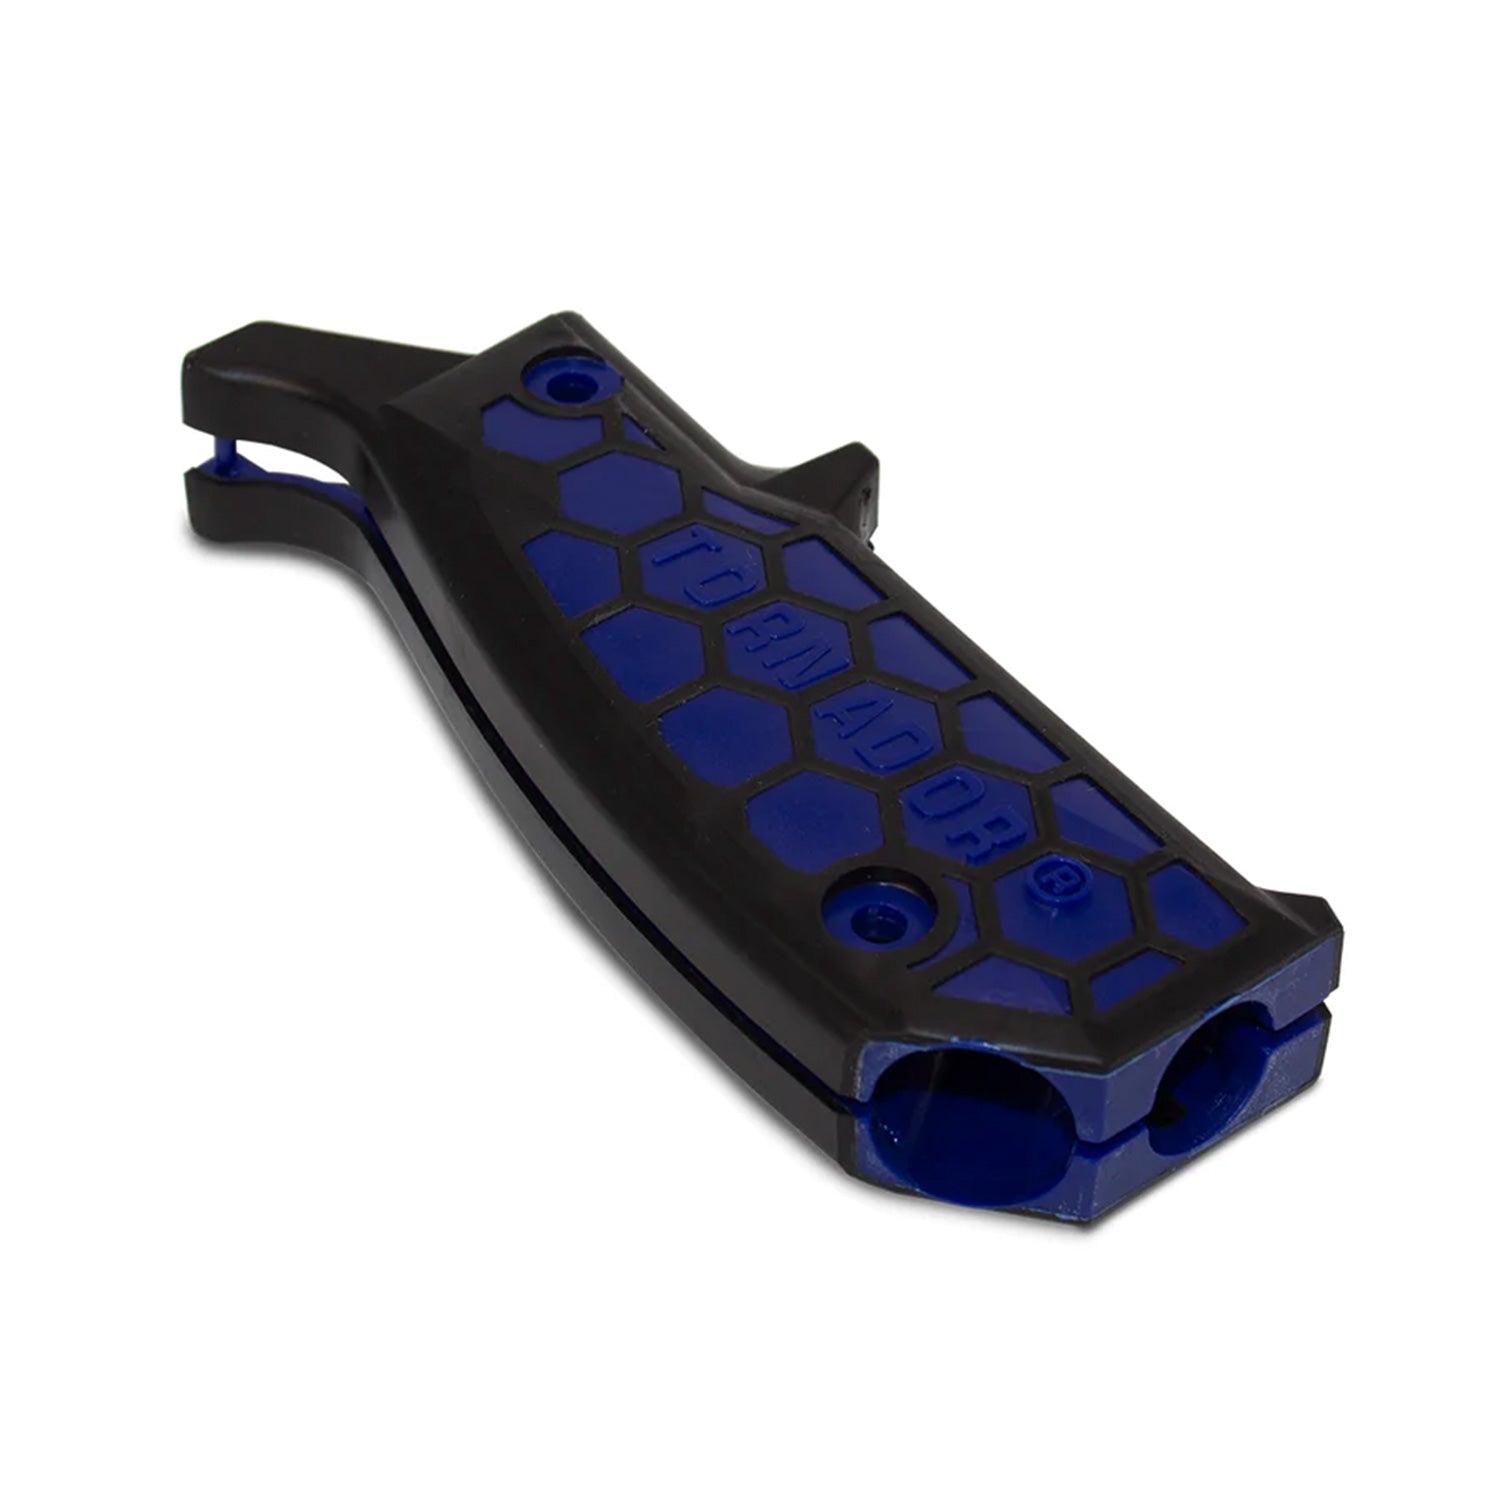 tornador-blue-replacement-handle-cover-grip